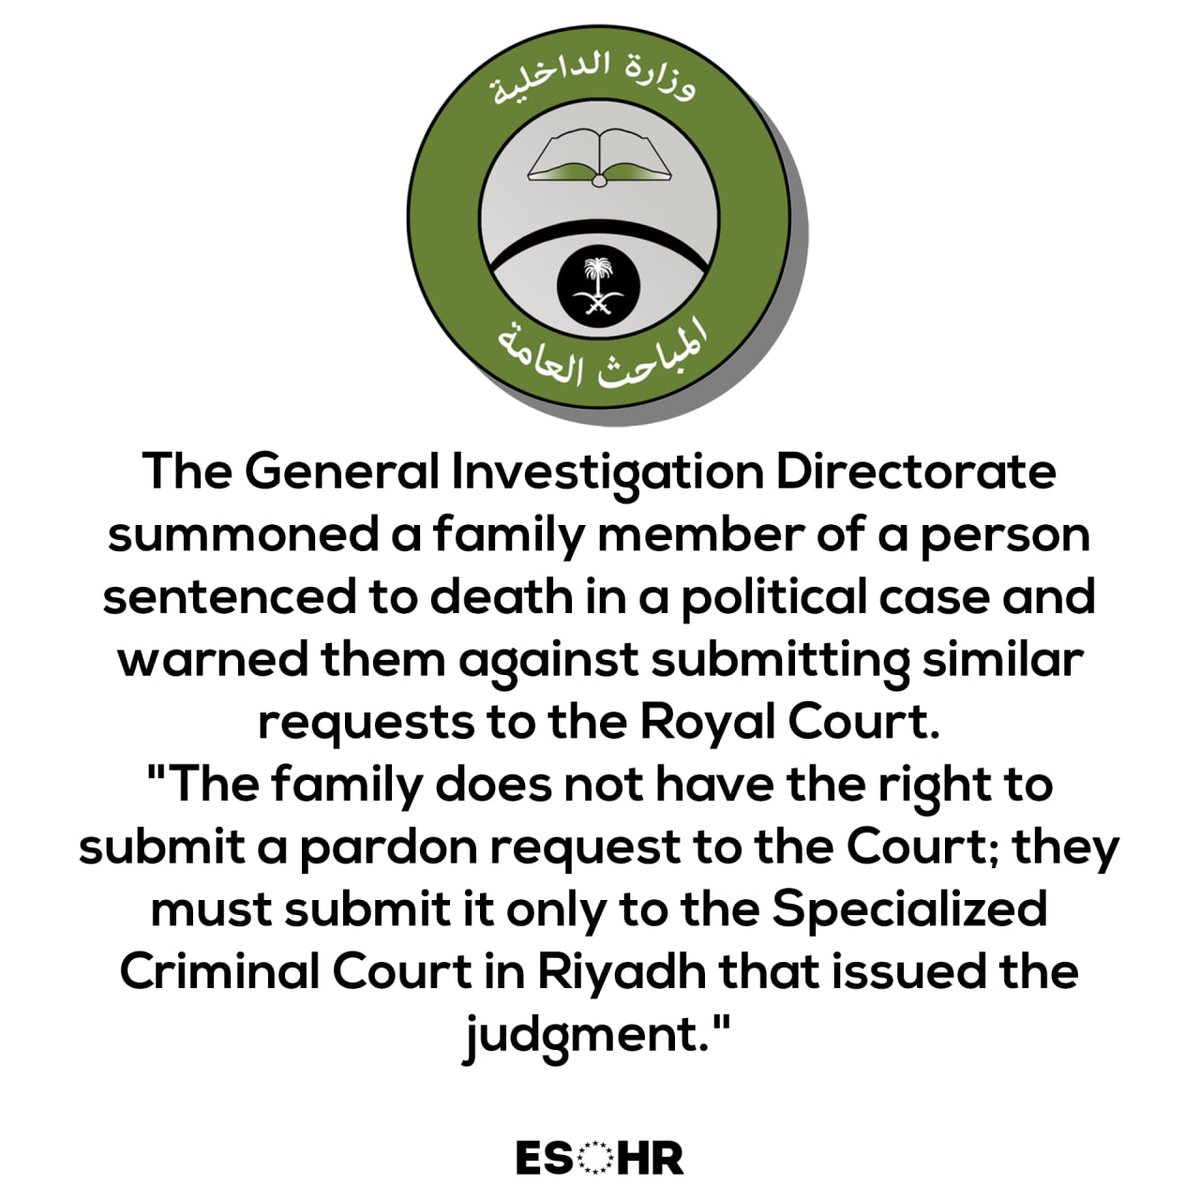 🔴 The King Signs Off on Death Sentences and Withholds Pardons Only the King can grant pardon for Taazir sentences. No clear procedure for requesting a pardon in #KSA. What happens when a death row inmate submits a pardon request to the Royal Court? cutt.ly/4etRJnwM